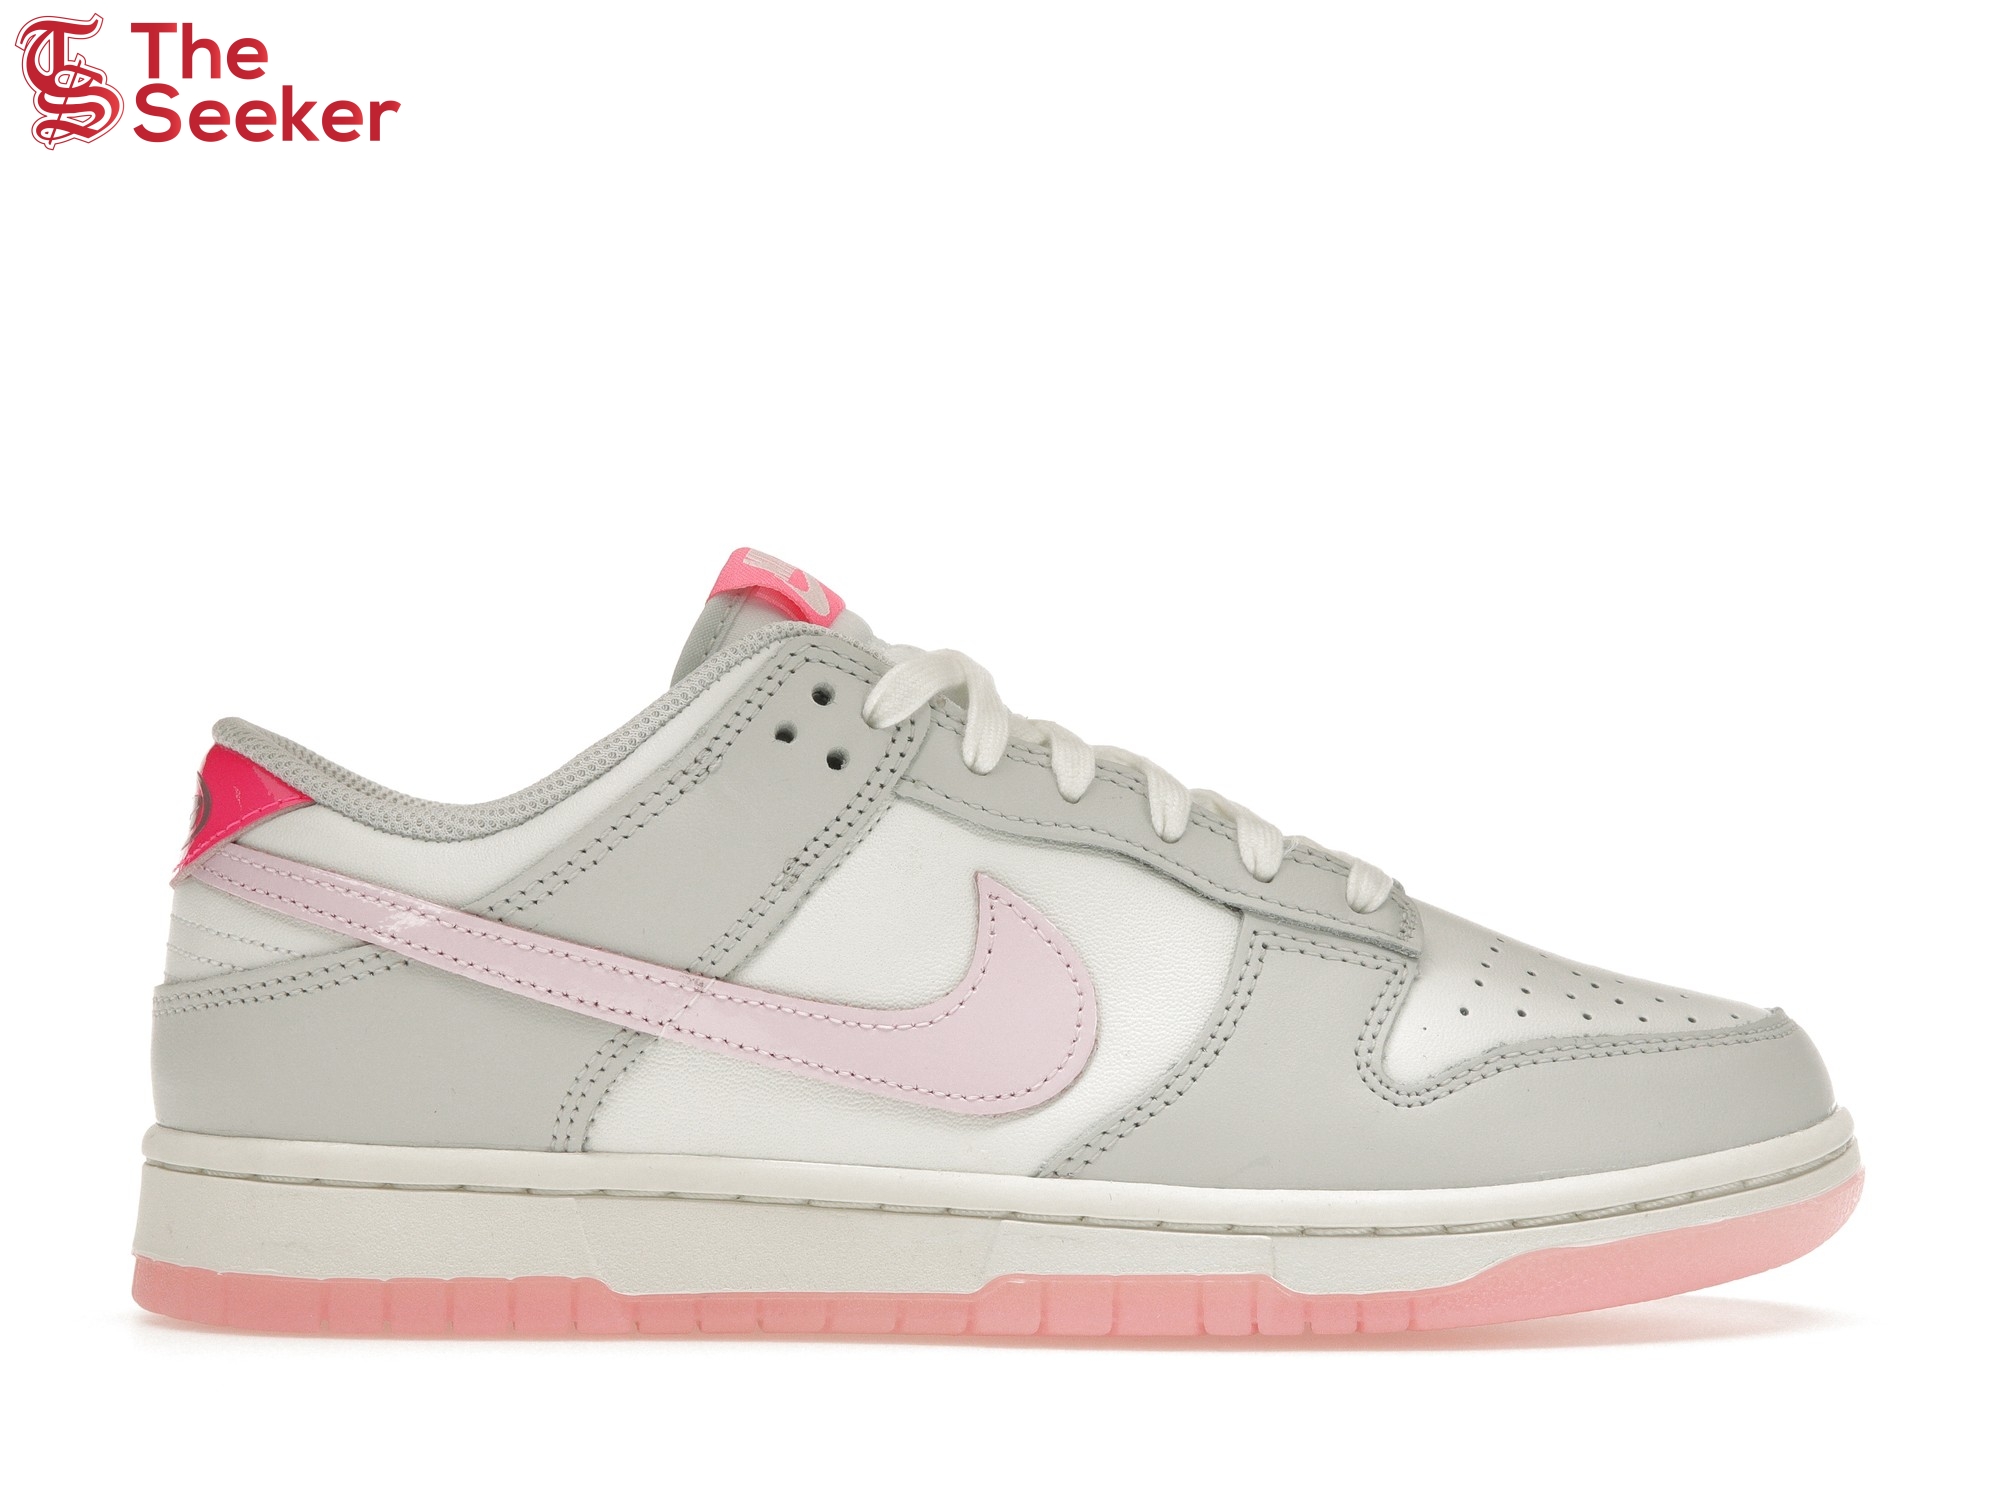 Nike Dunk Low 520 Pack Pink